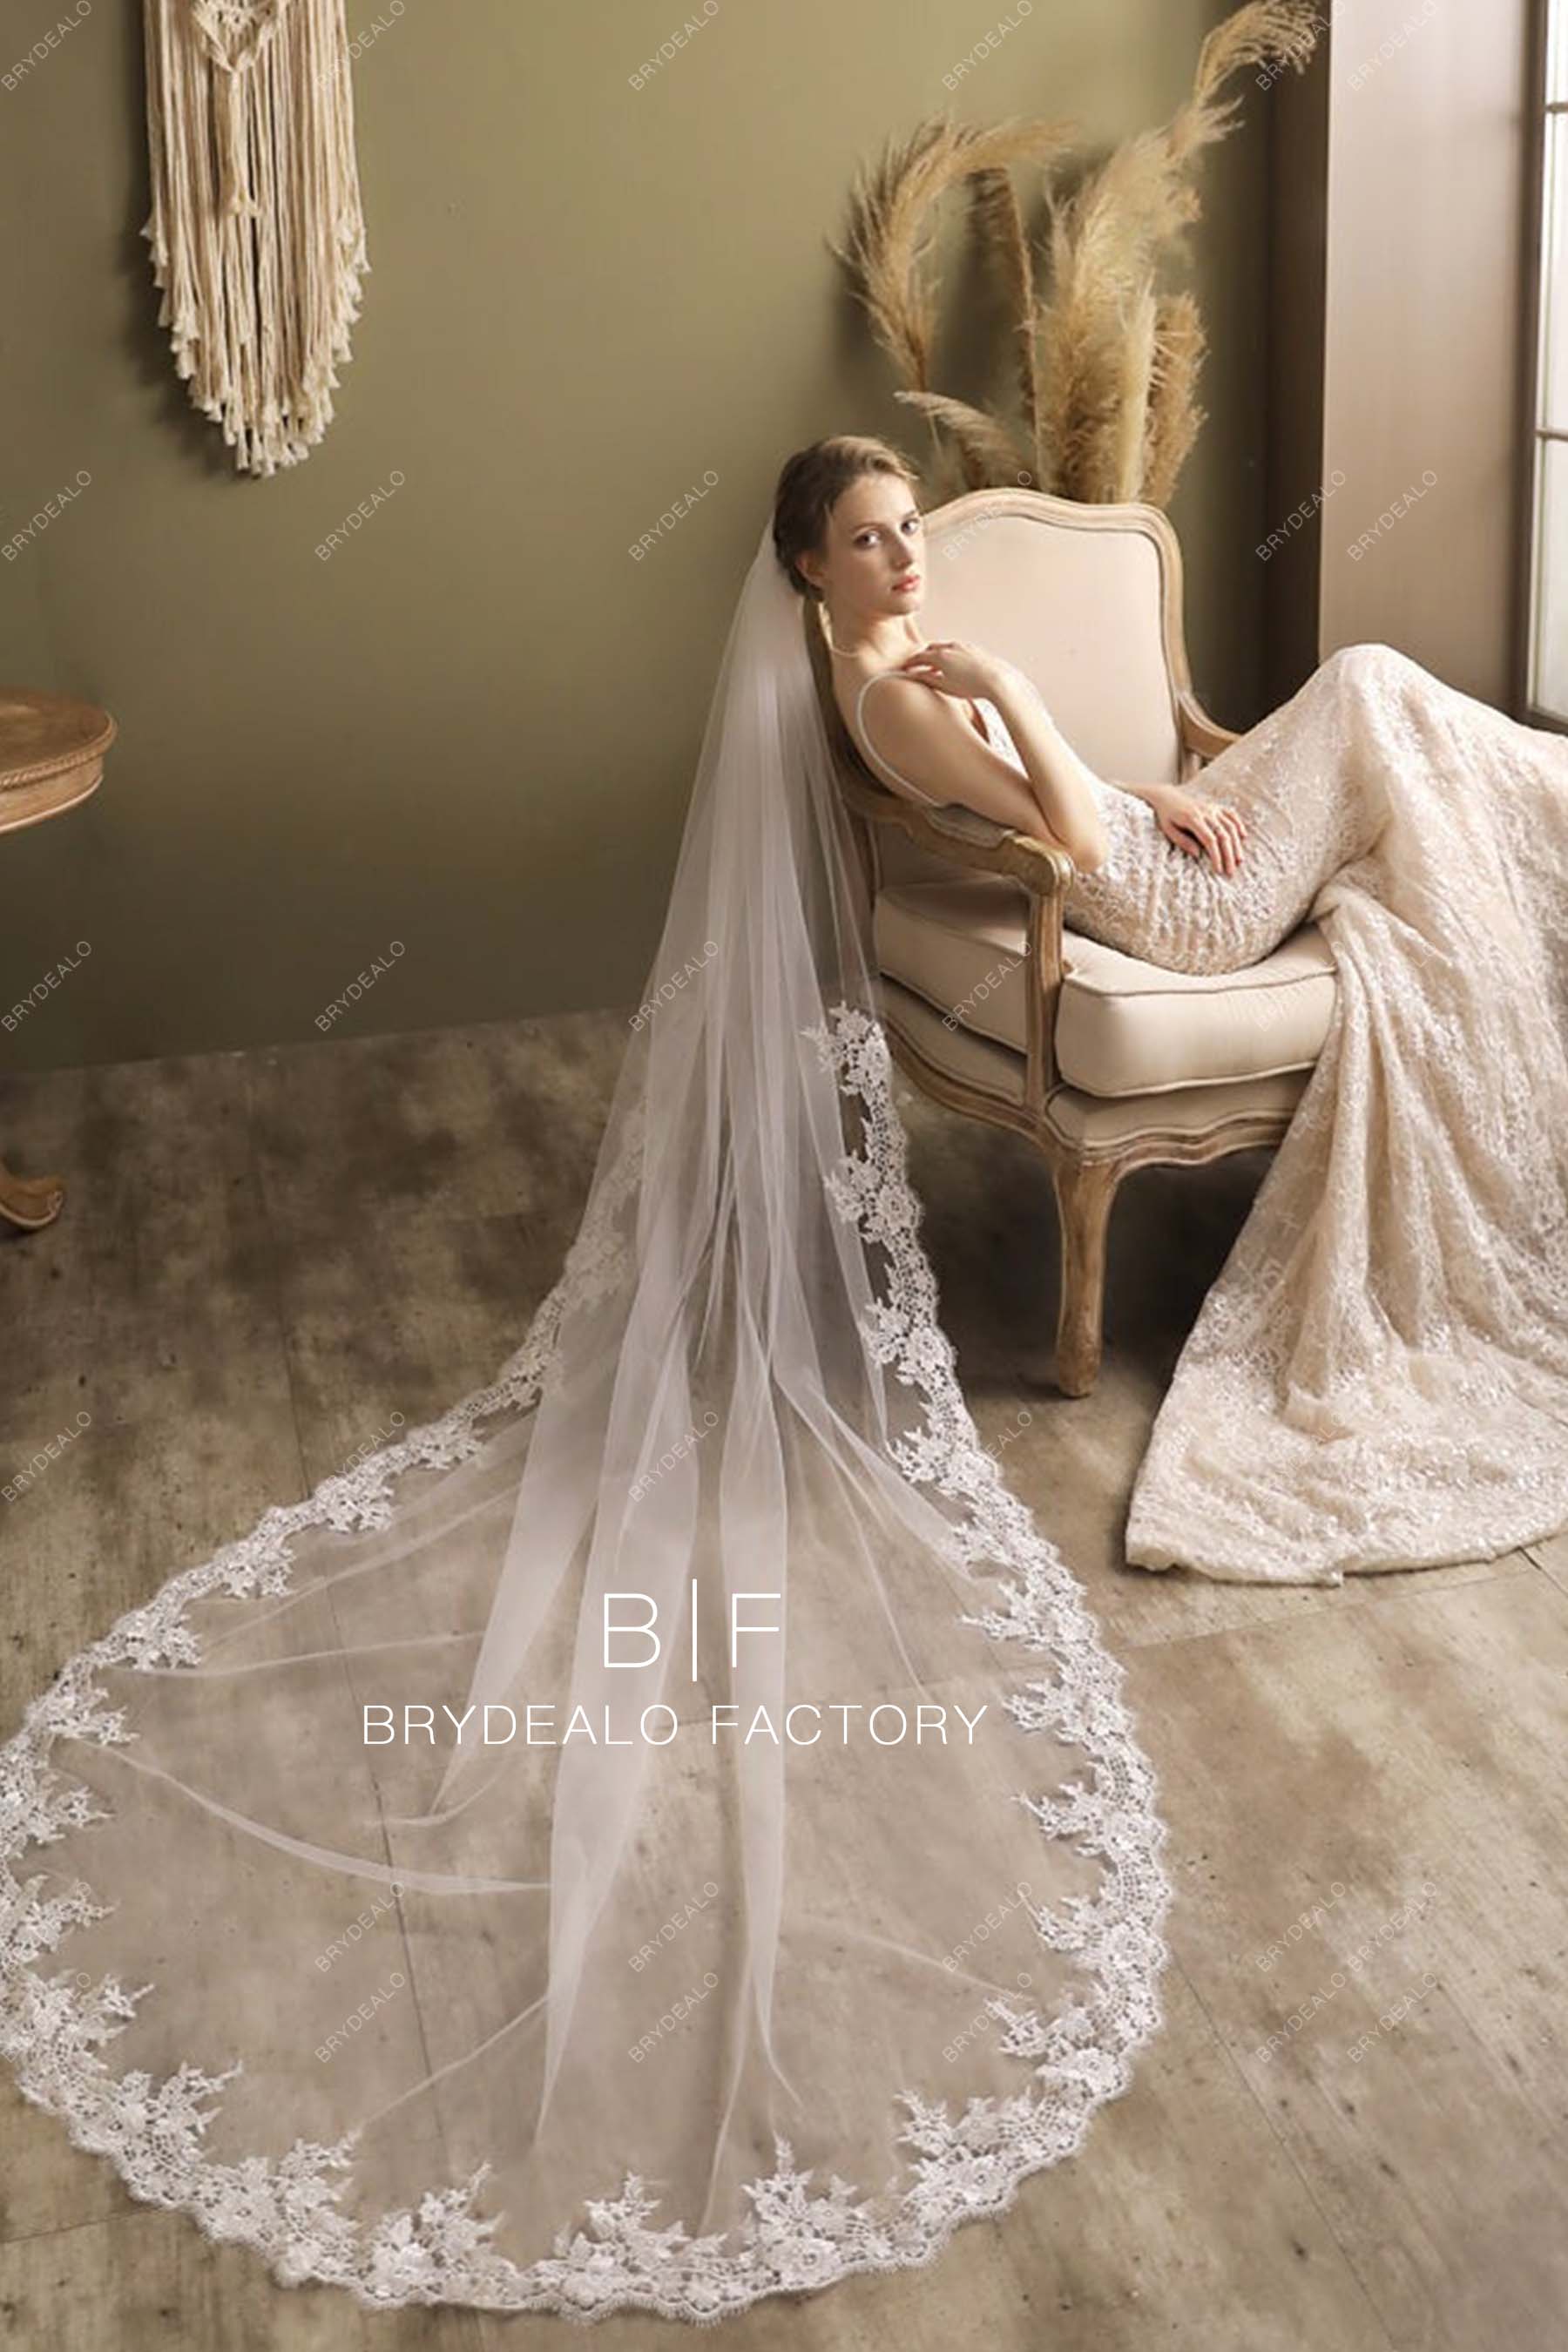 Wedding Veils - Lace Bridal Cape Veil - Cathedral Length White